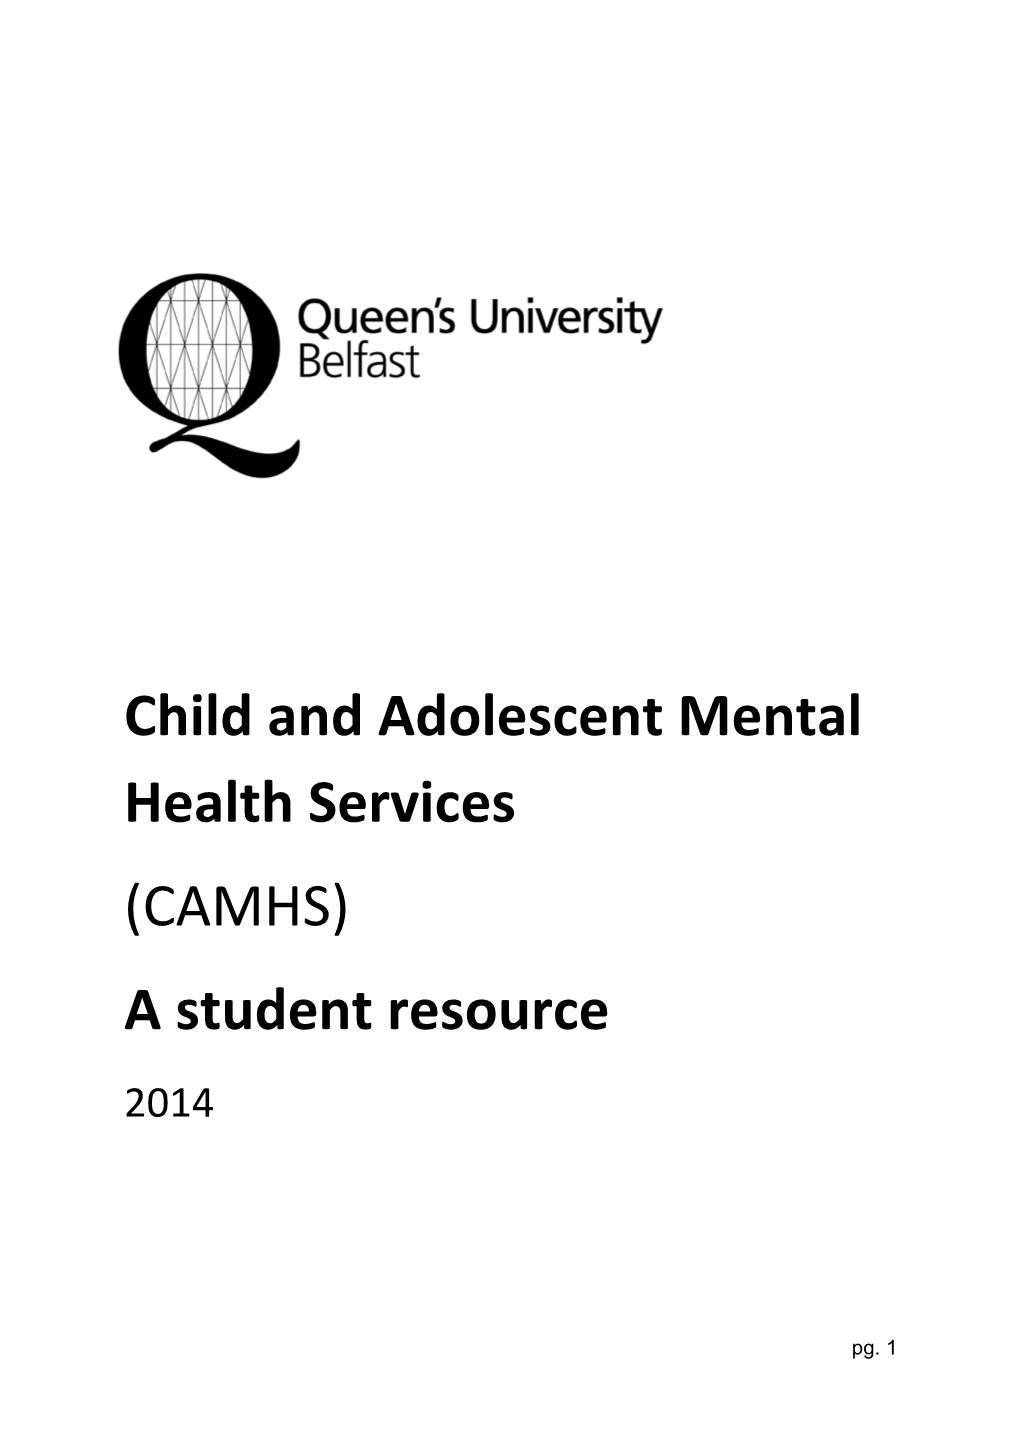 CAMHS) a Student Resource 2014